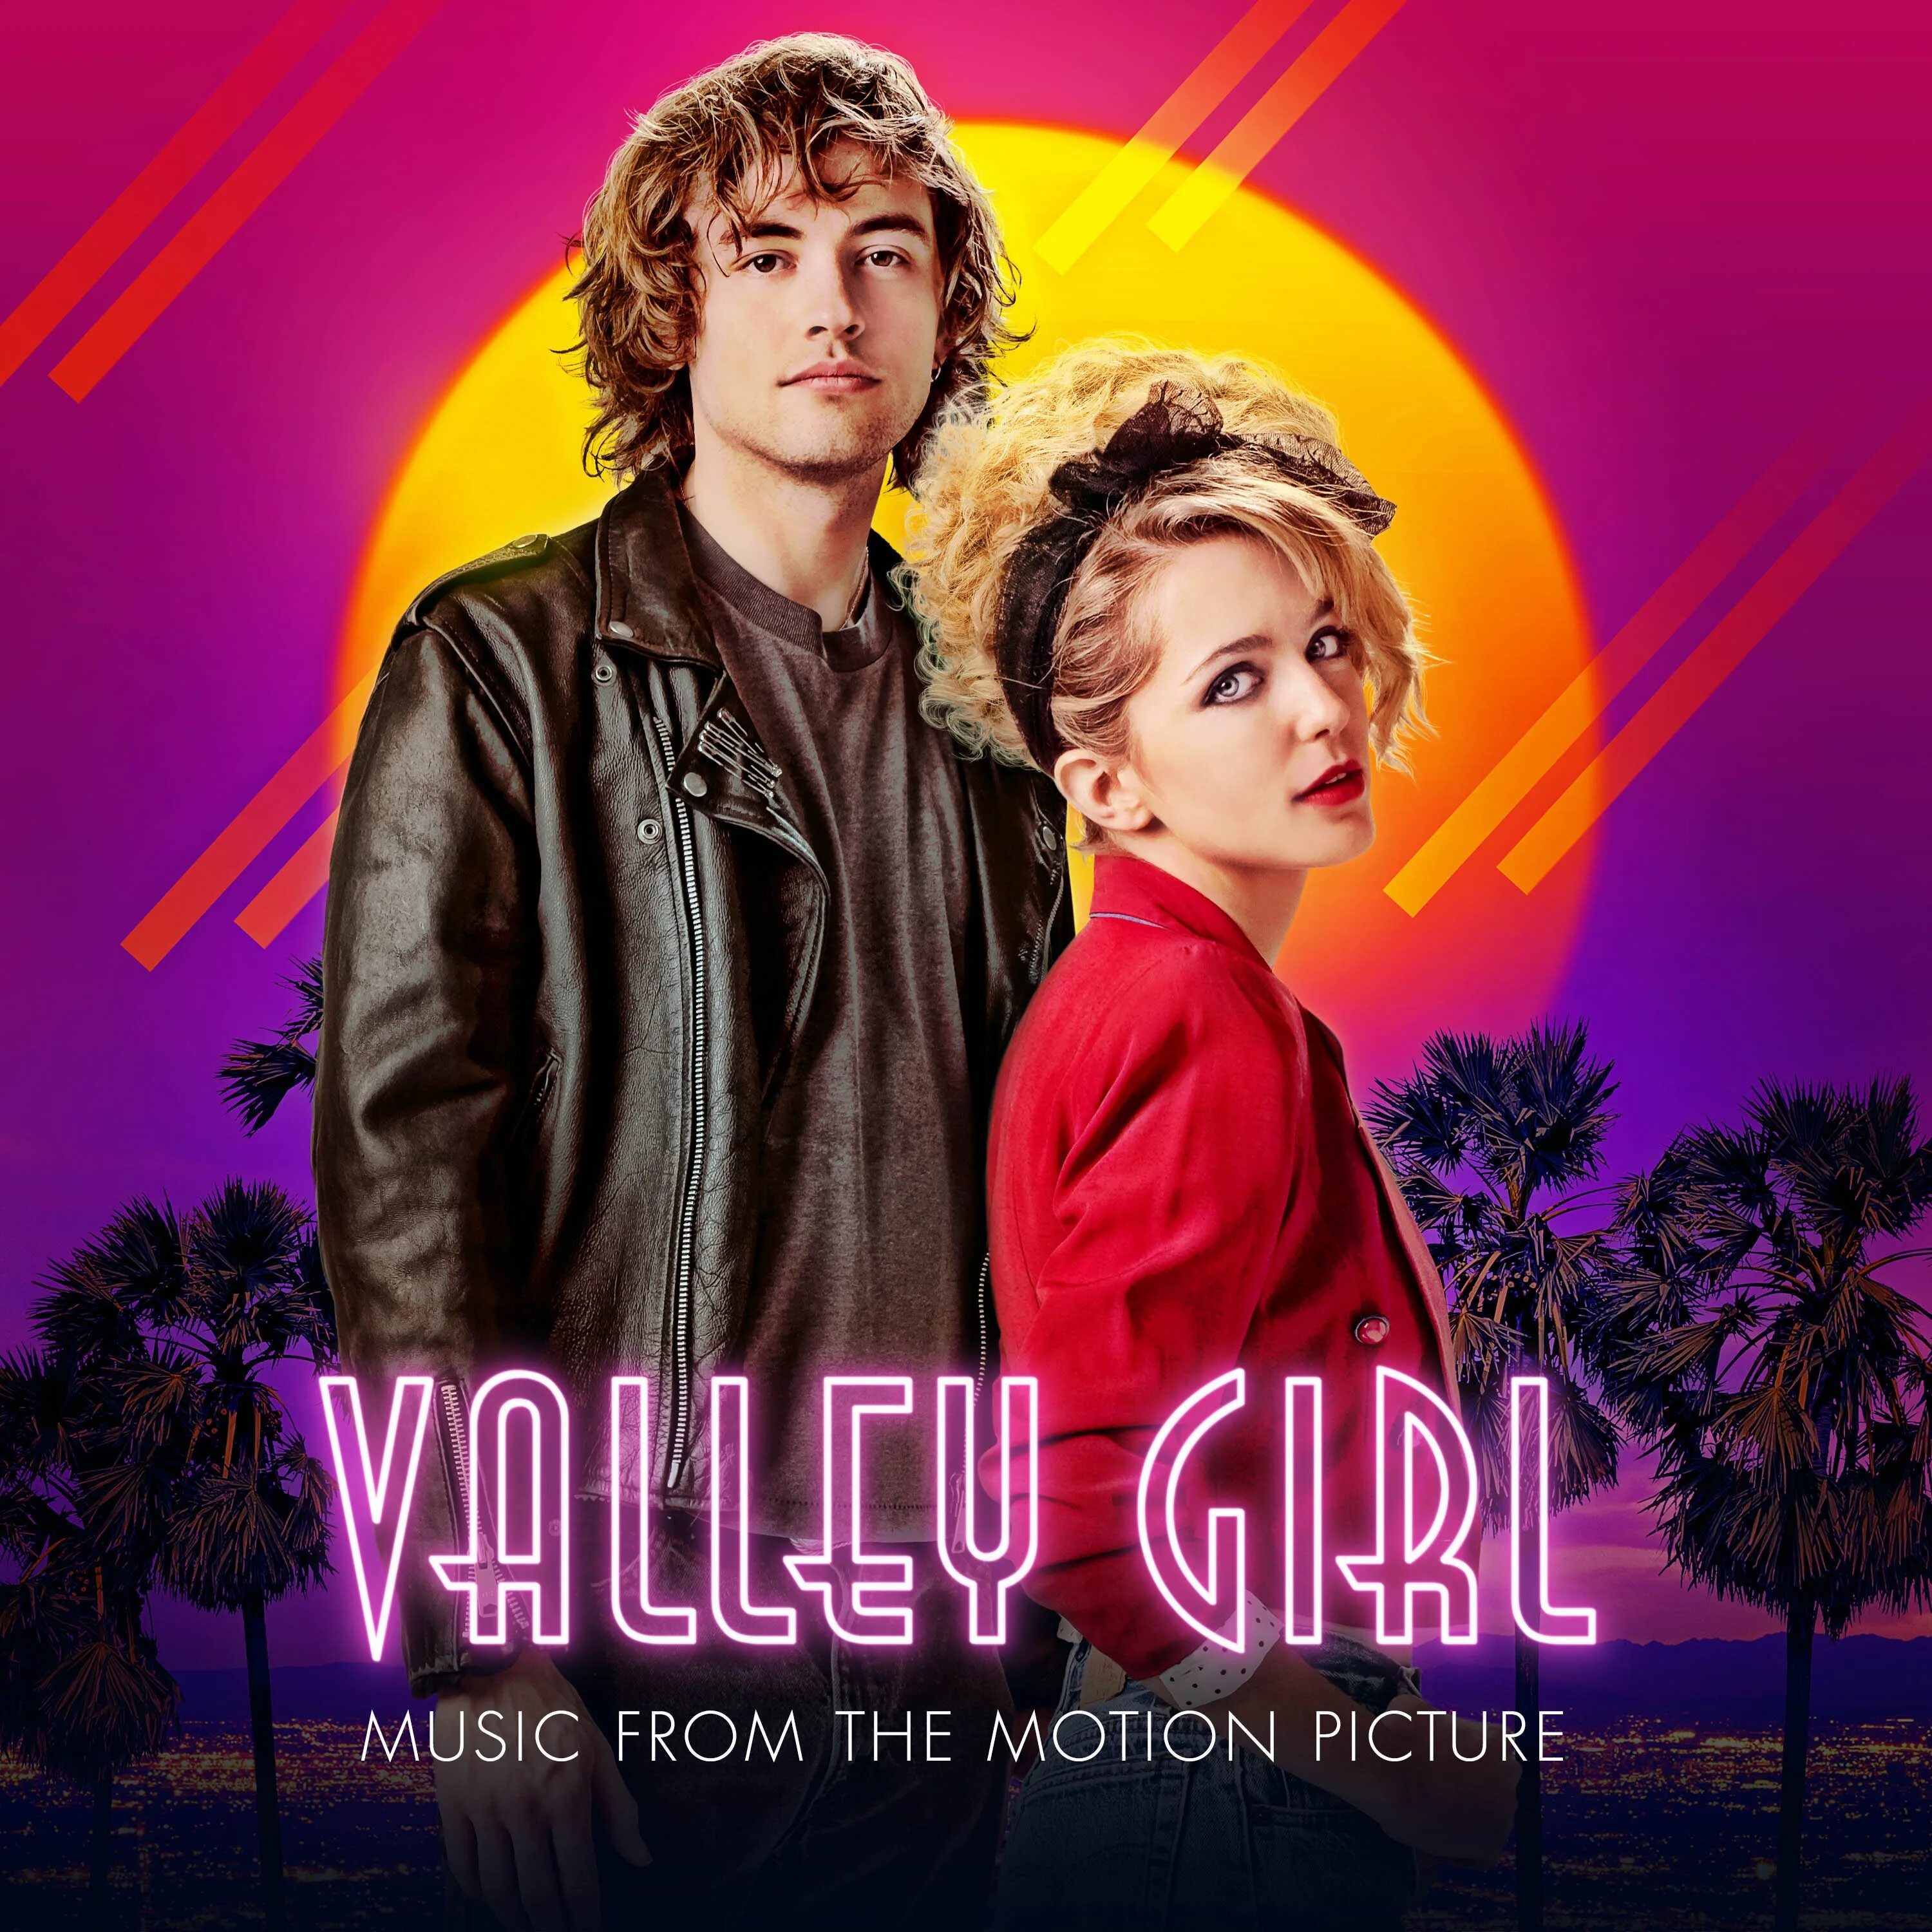 Girl soundtrack. Valley girl. Makin’ me Crazy. With Love for the ages.